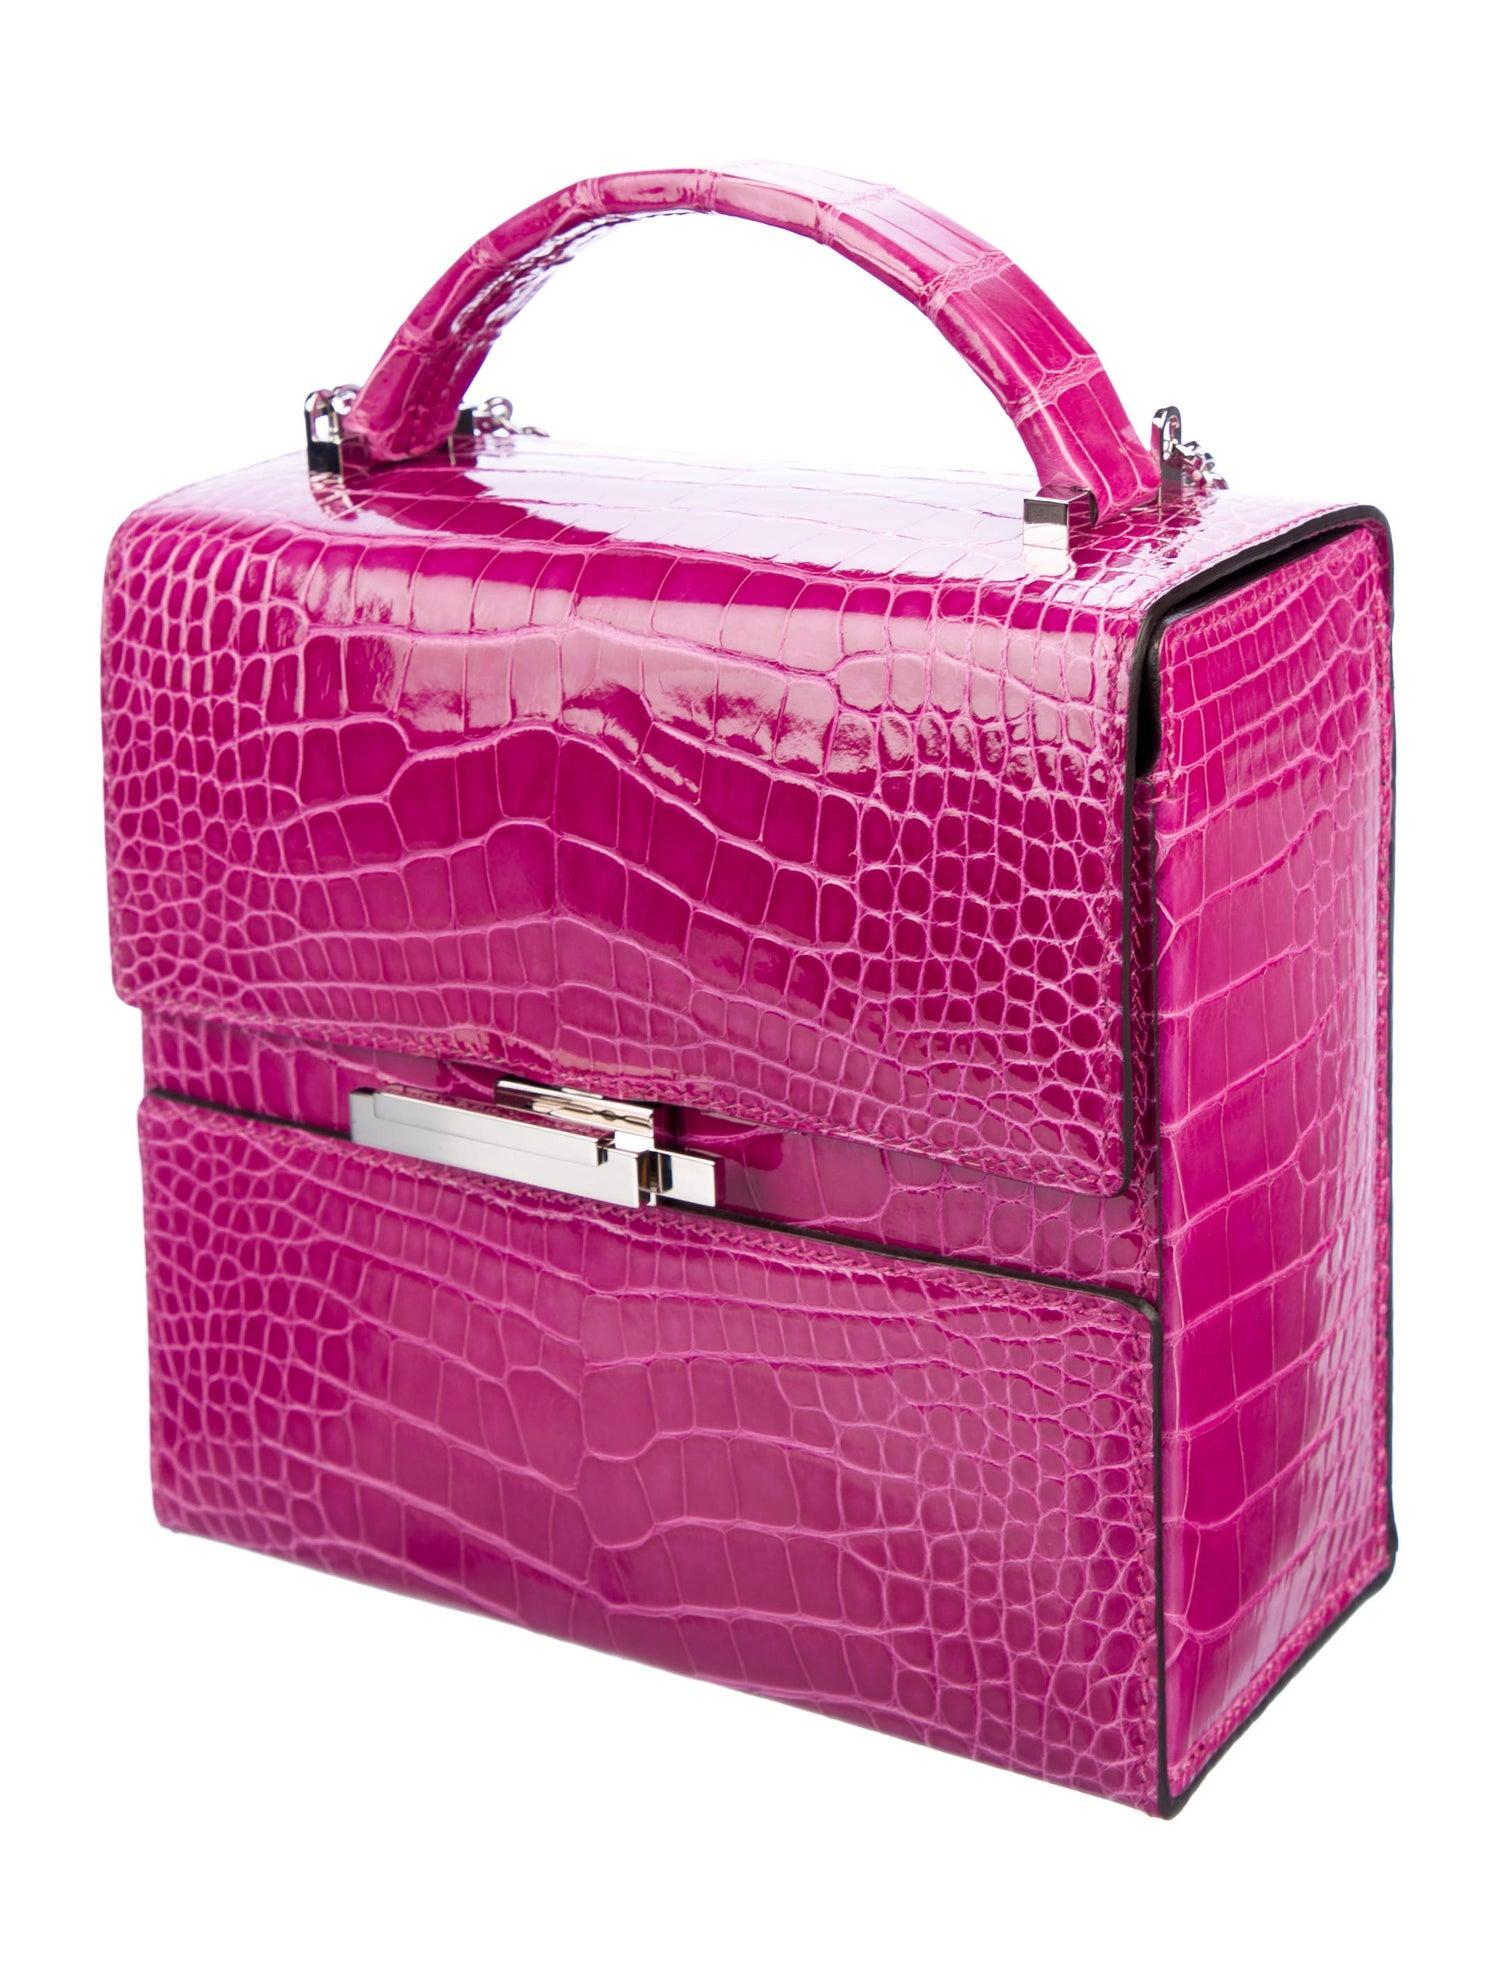 Hermes NEW Pink Purple Alligator Exotic Leather Top Handle Satchel Kelly Style Chain Bag in Box 

Alligator 
Palladium-plated hardware
Leather lining
Push-lock closure 
Made in France
Shoulder strap drop 18